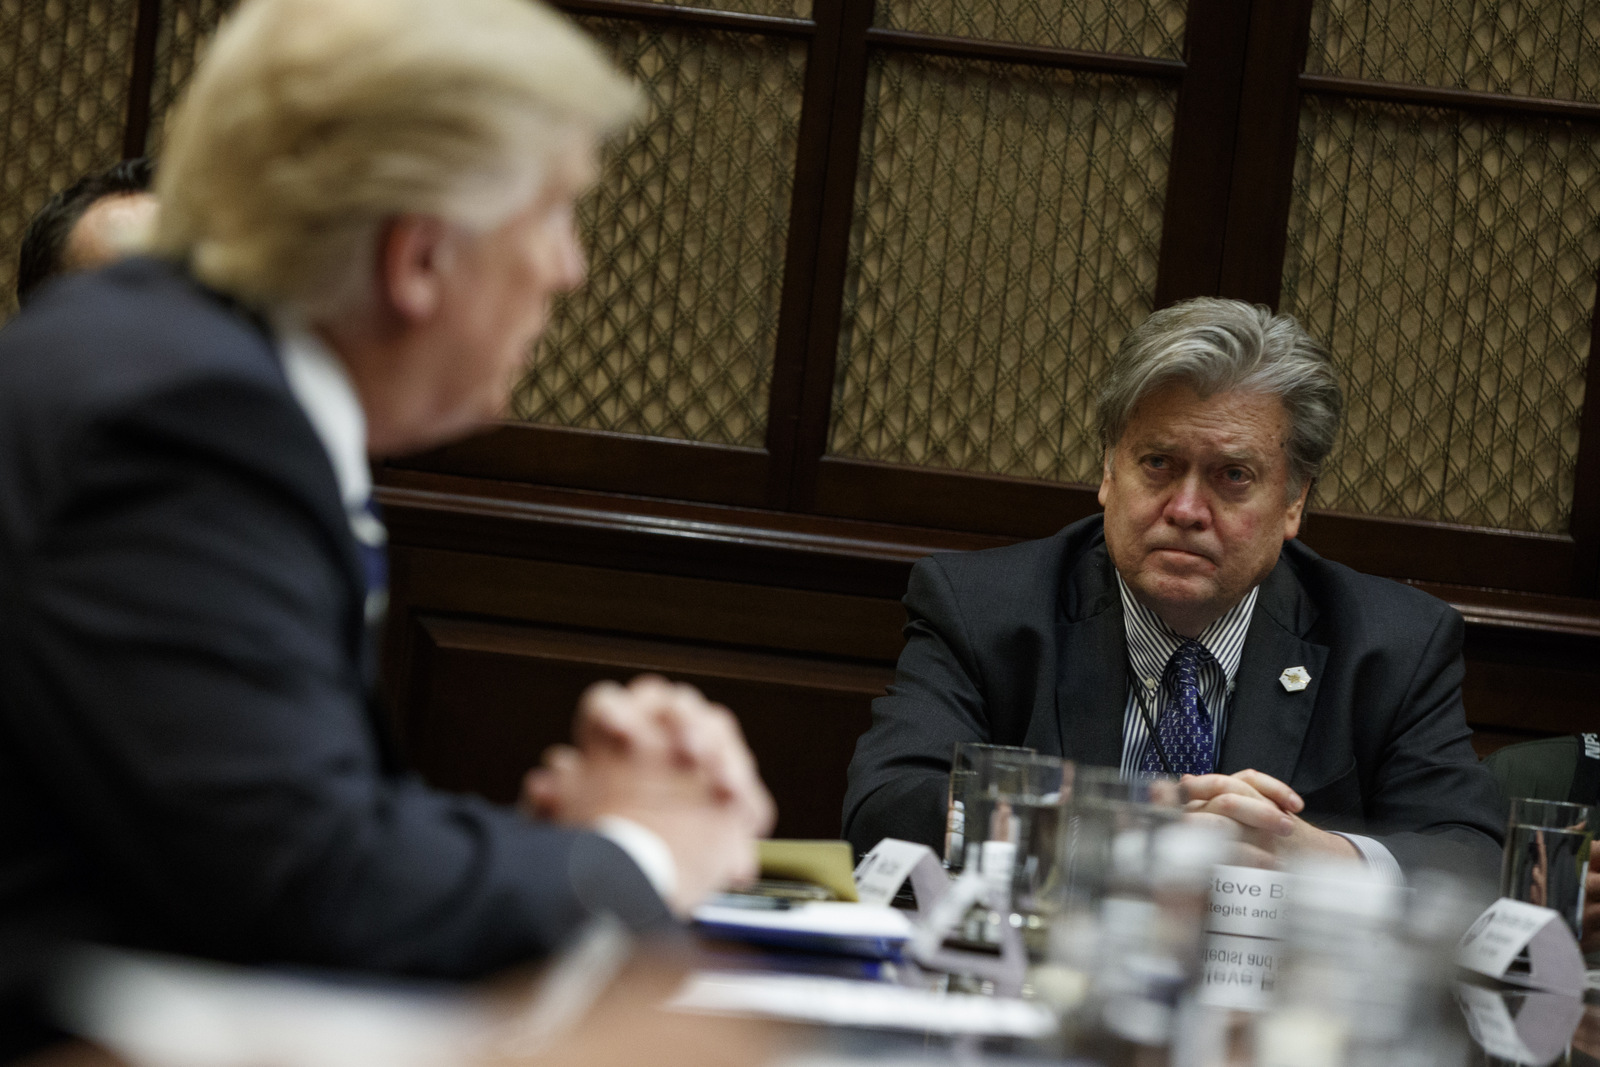 White House Chief Strategist Steve Bannon listens as President Donald Trump speaks in the Roosevelt Room of the White House in Washington, Tuesday, Jan. 31, 2017. (AP/Evan Vucci)